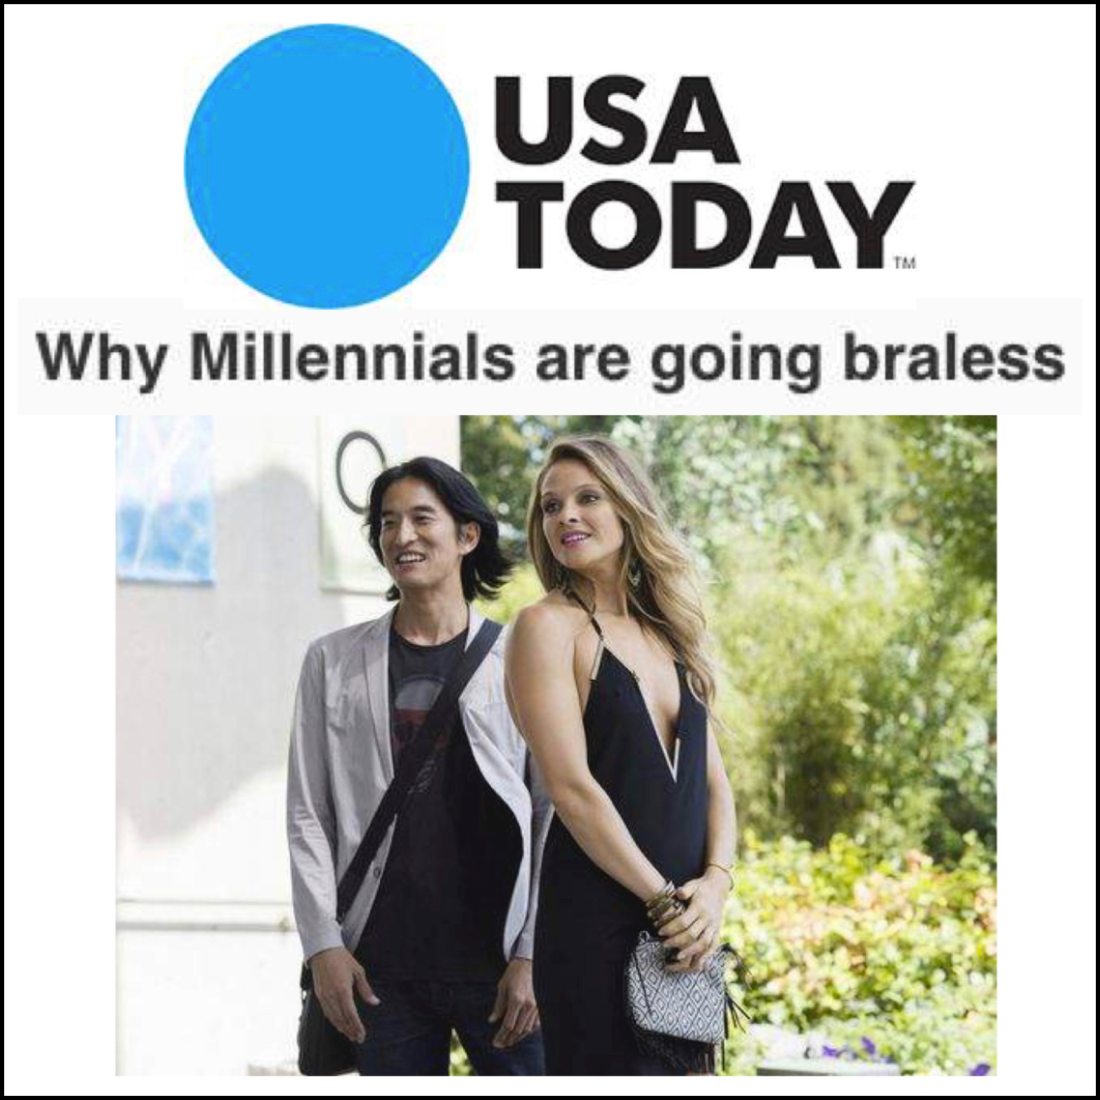 Why Millennials are going braless